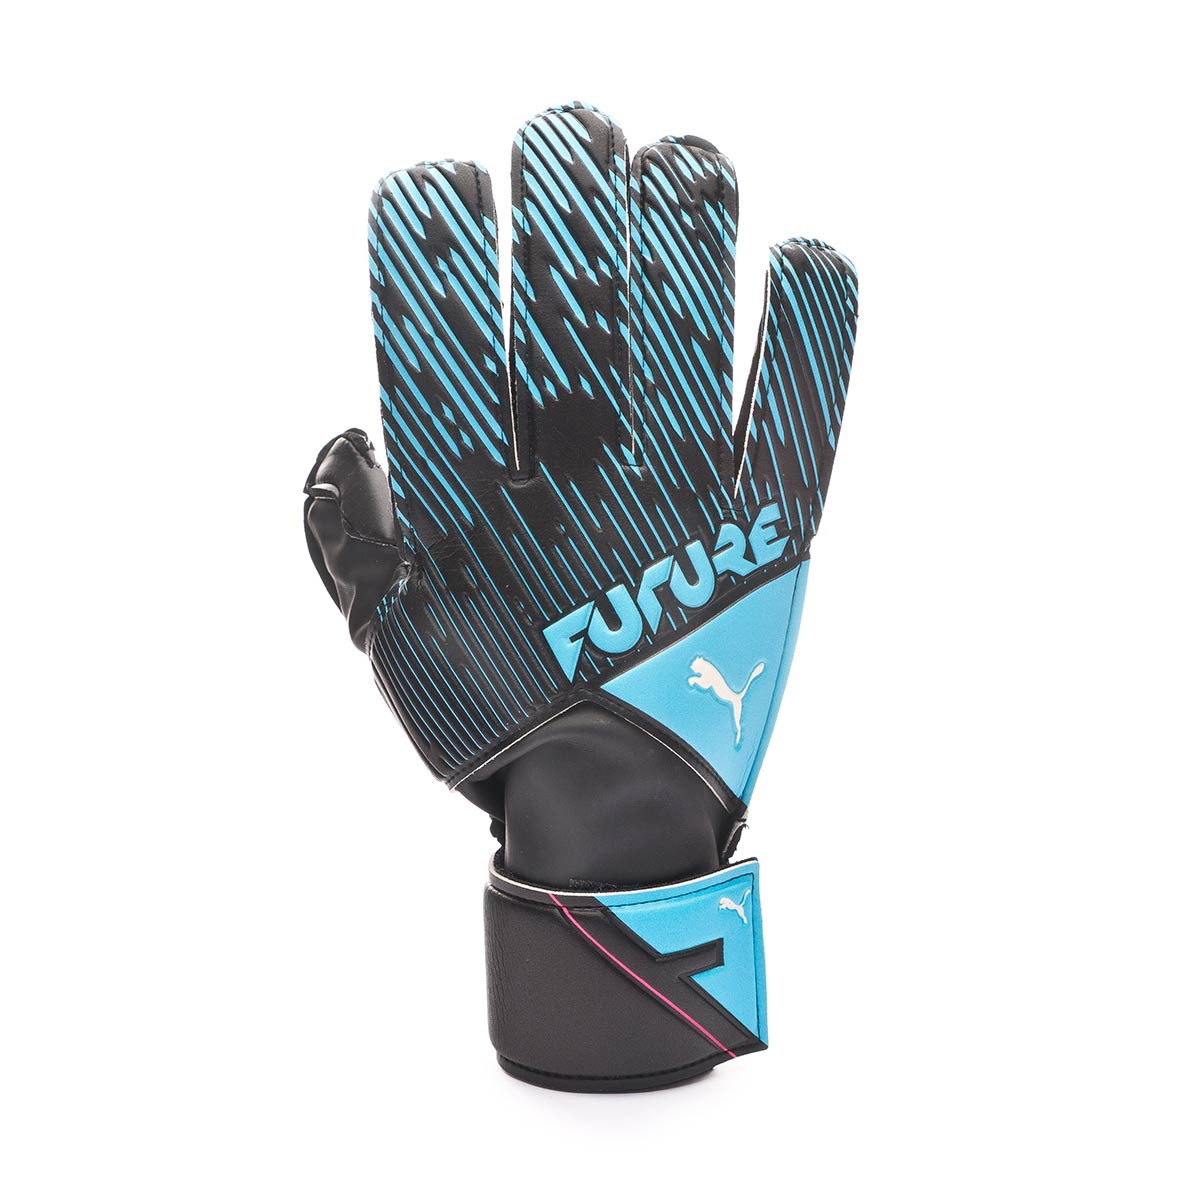 puma football gloves pink and blue